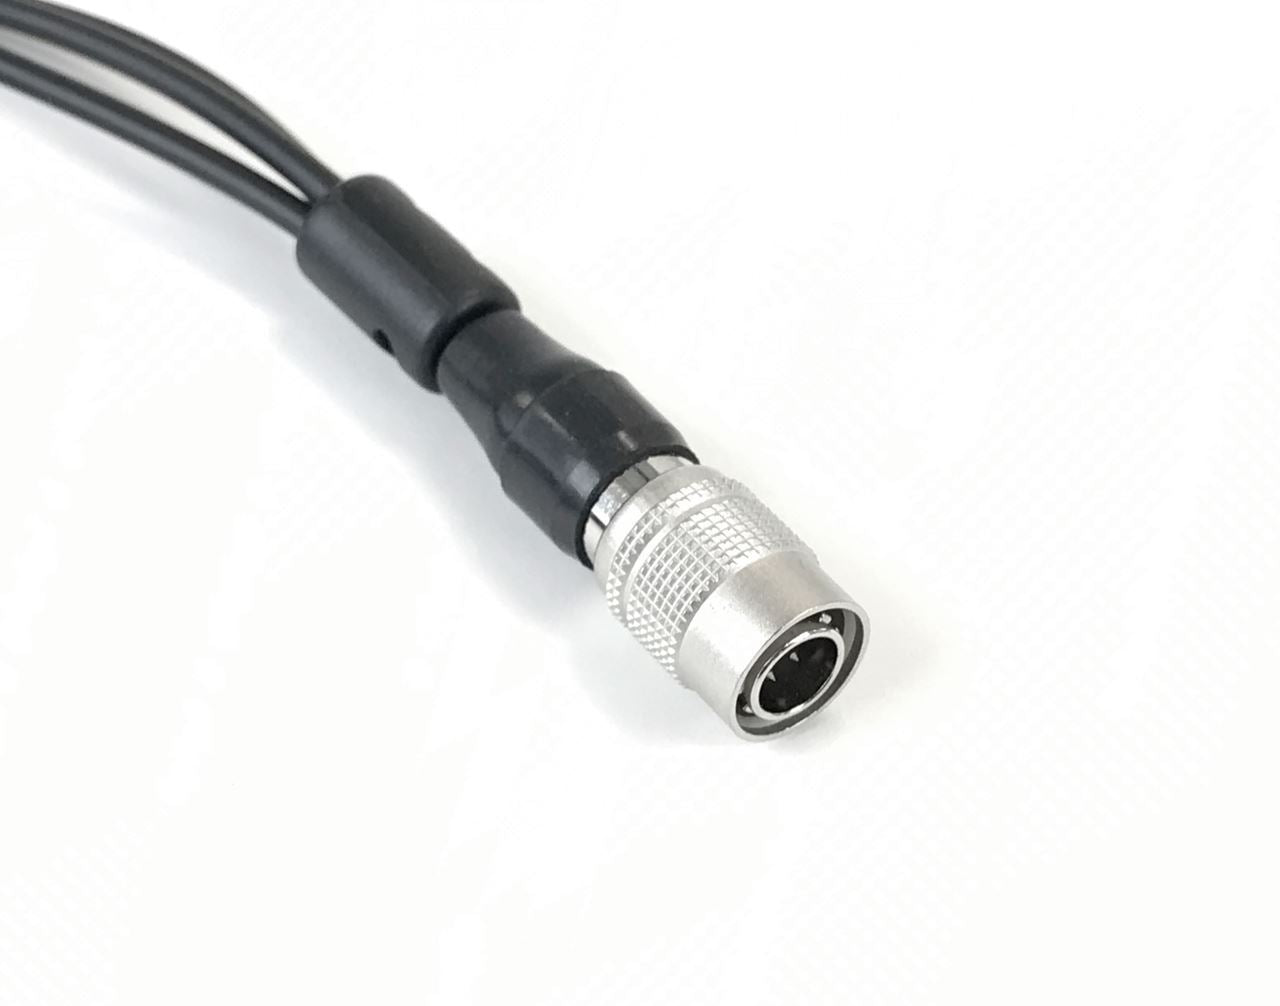 Comparable KHS-12 3 wire mini lapel mic with earphone for use with the Kenwood NX-5320 Portable Radio - Waveband Communications